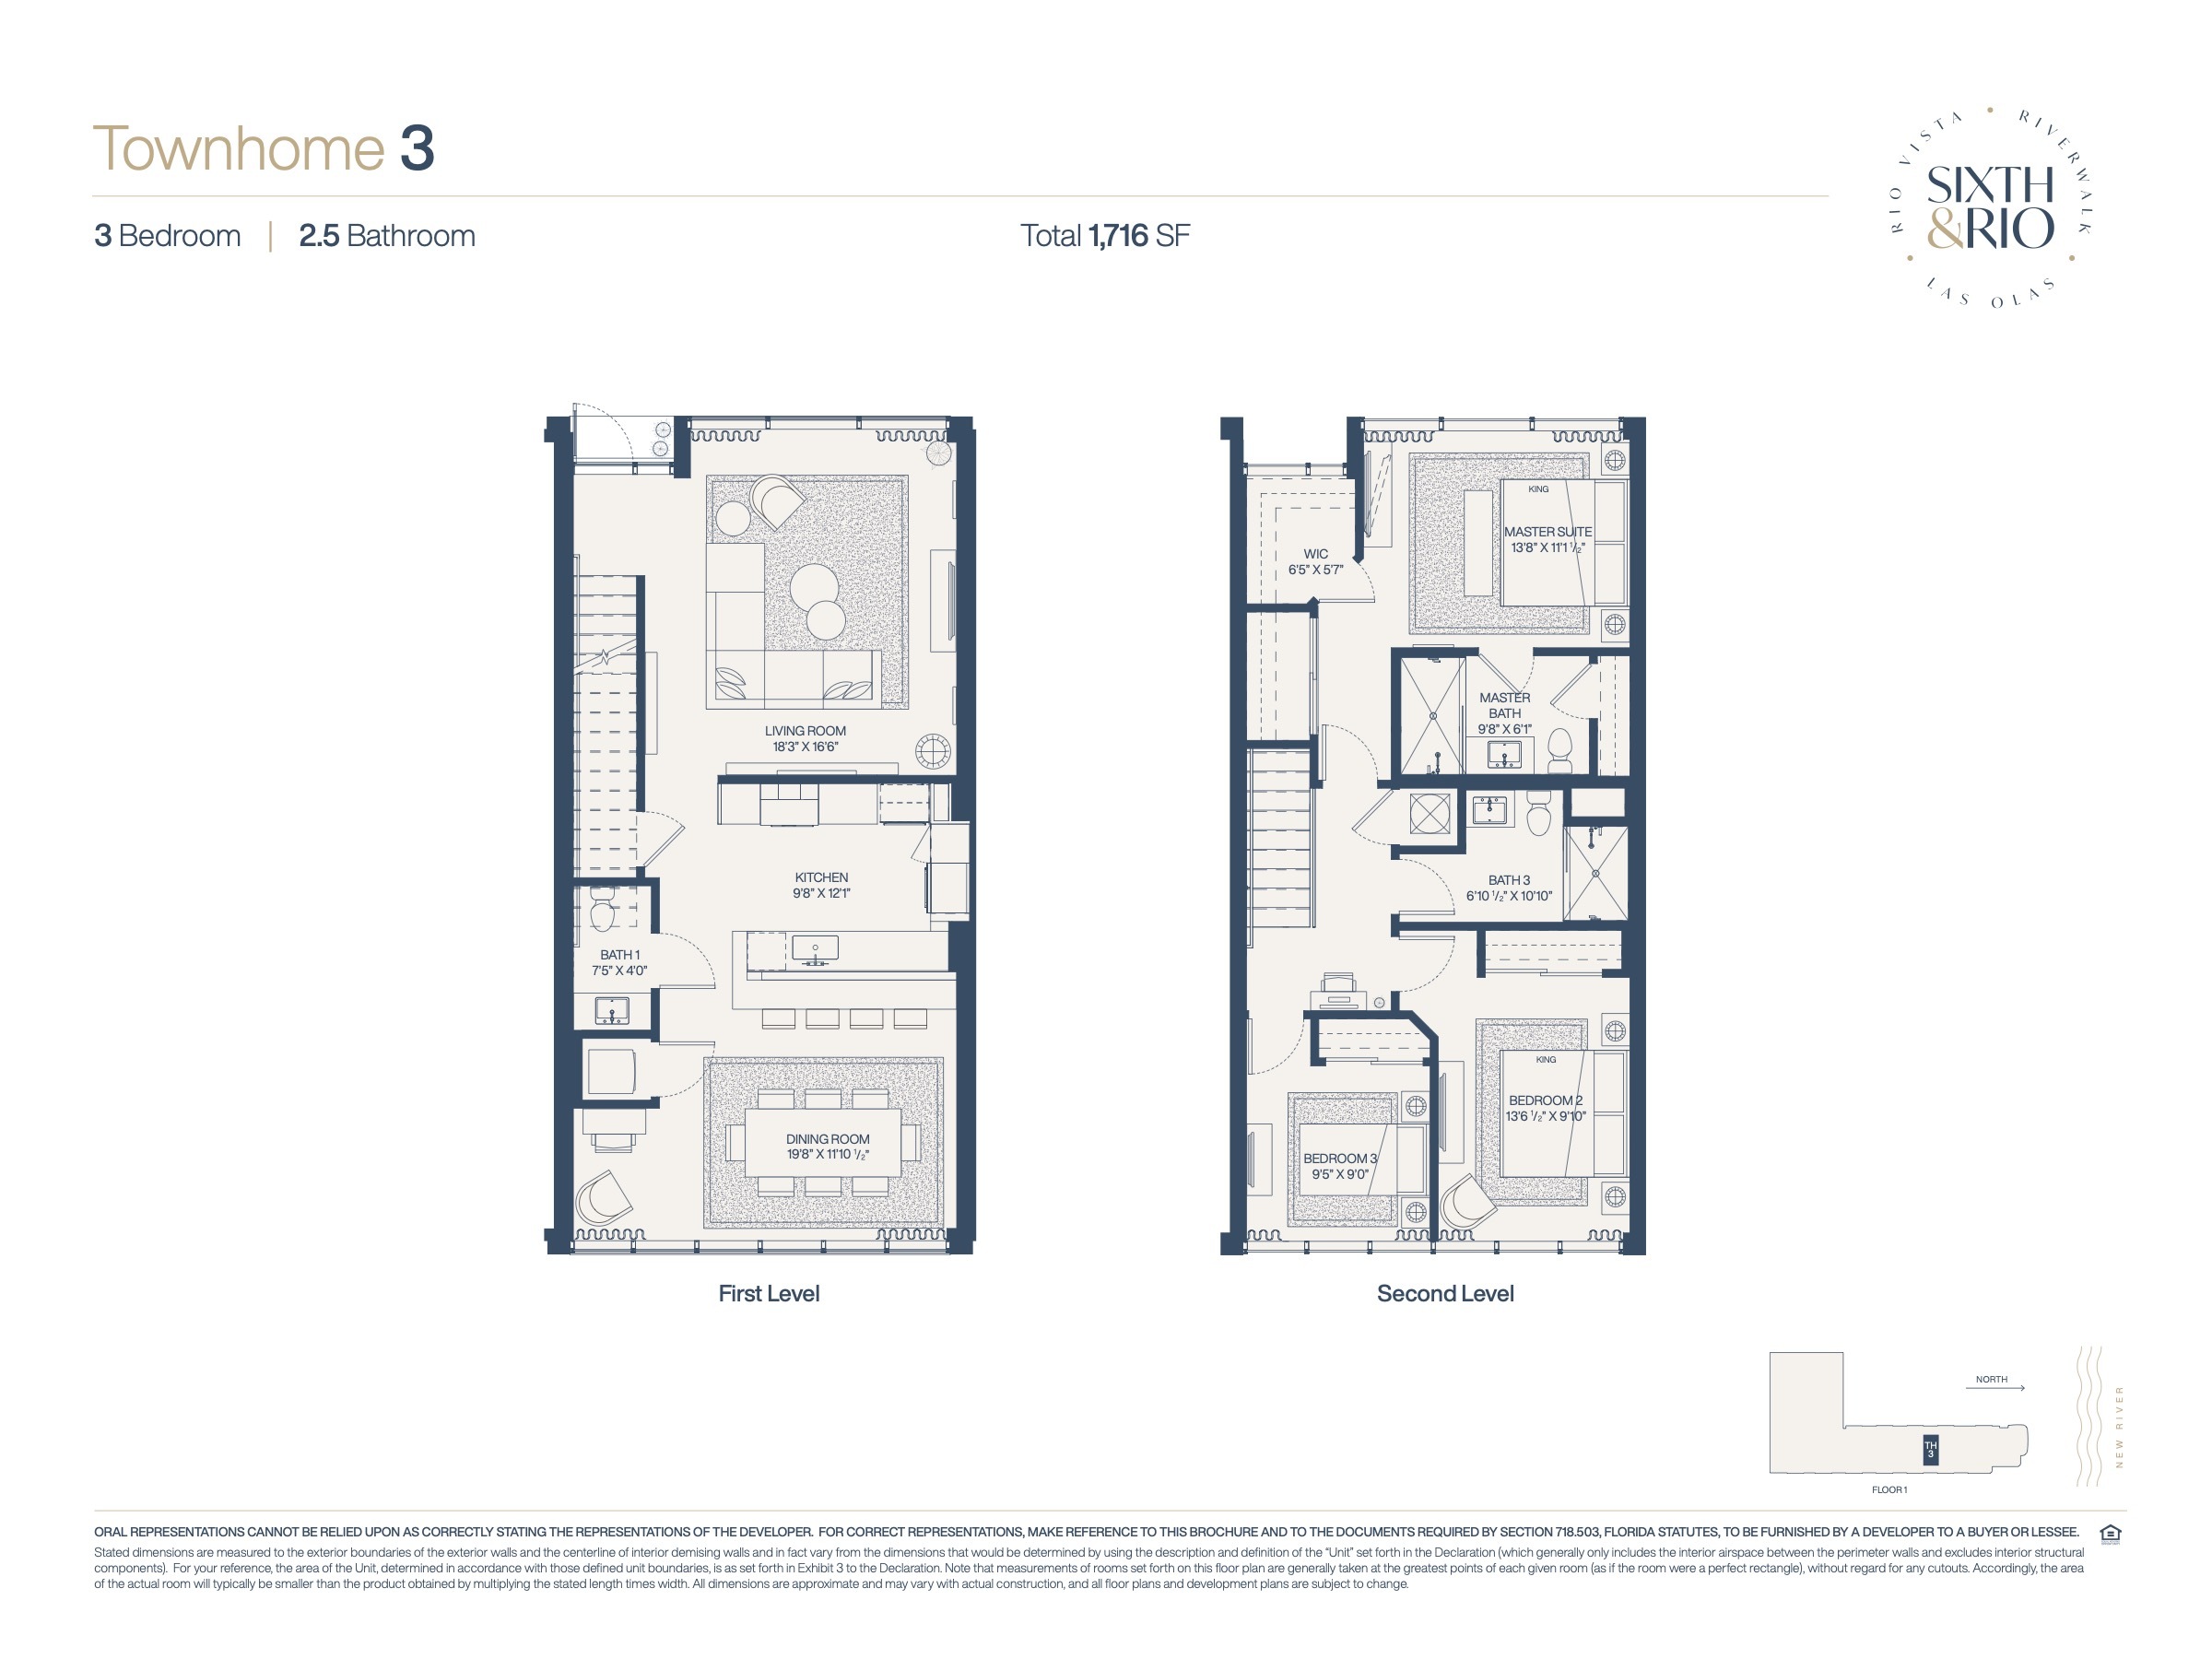 Floor Plan for Sixth & Rio Fort Lauderdale Floorplans, Townhome 3